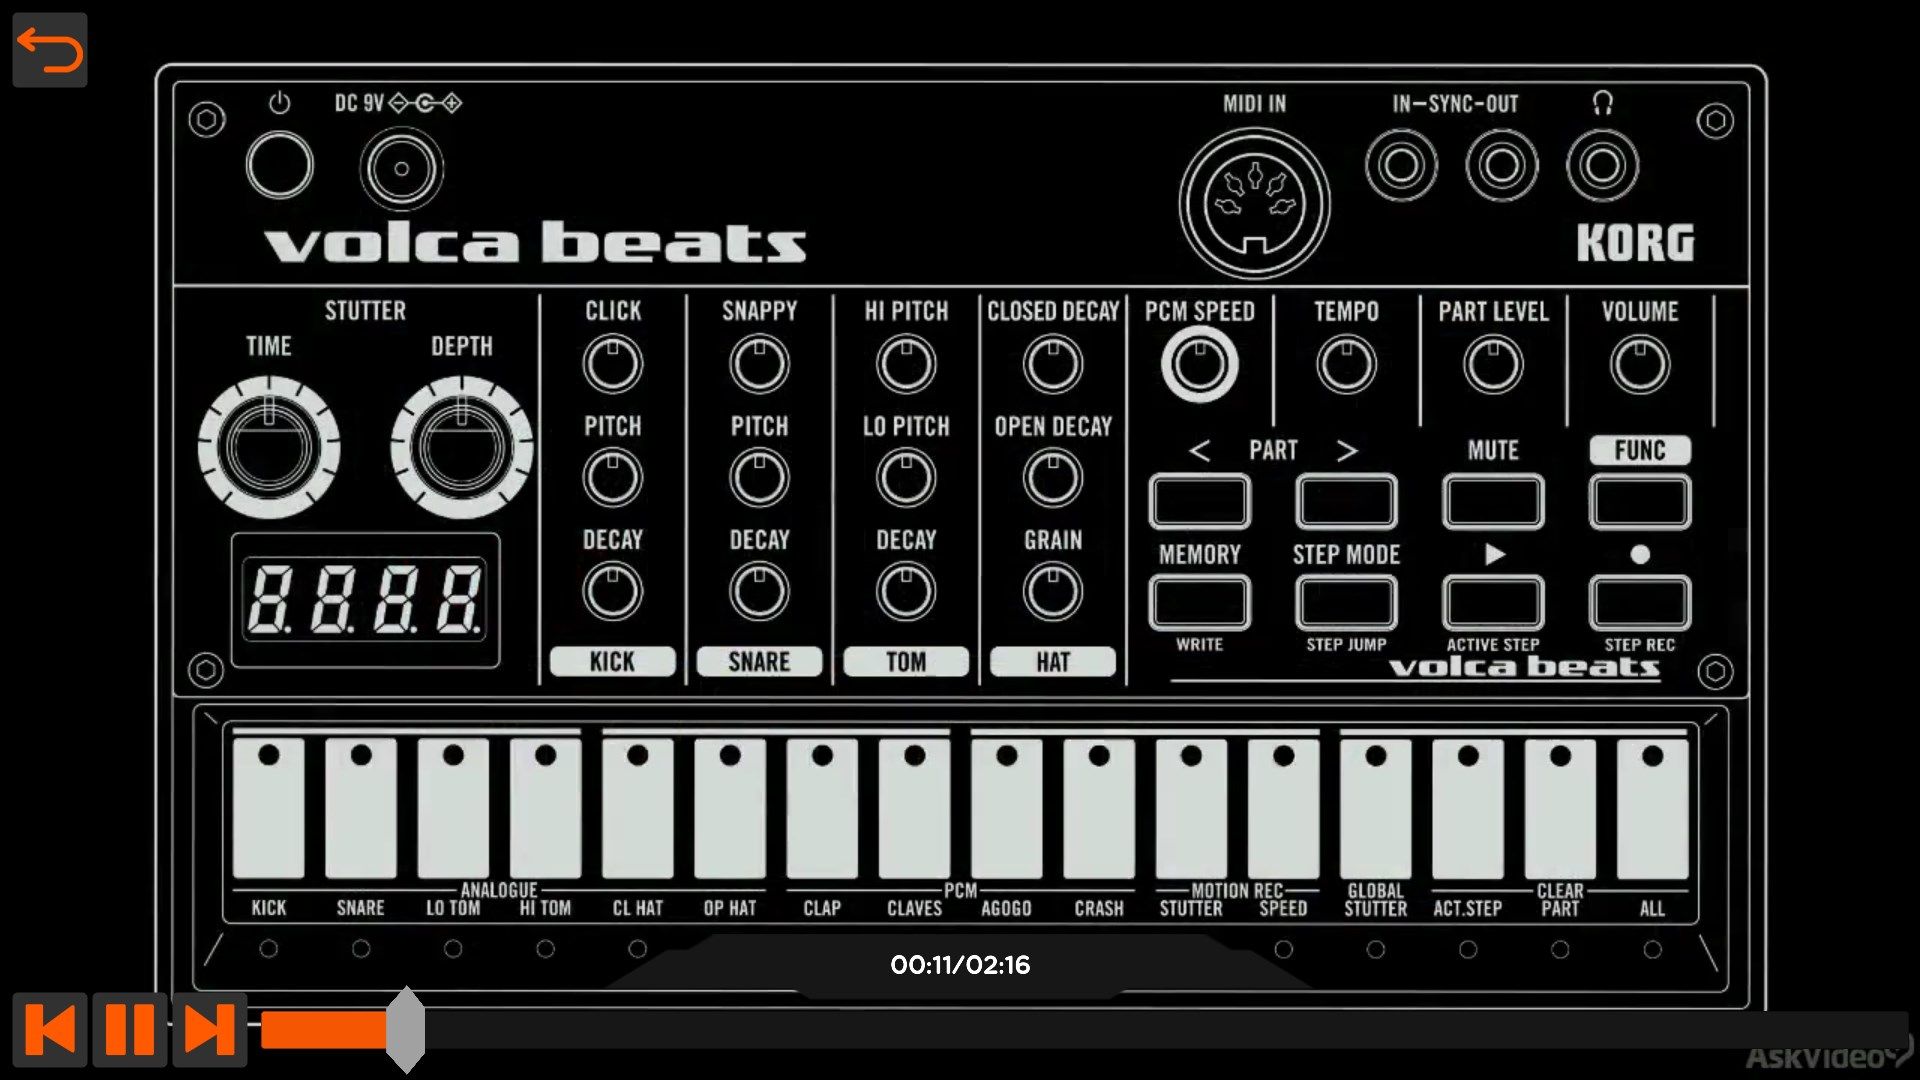 volca beats Explore Course By Ask.Video